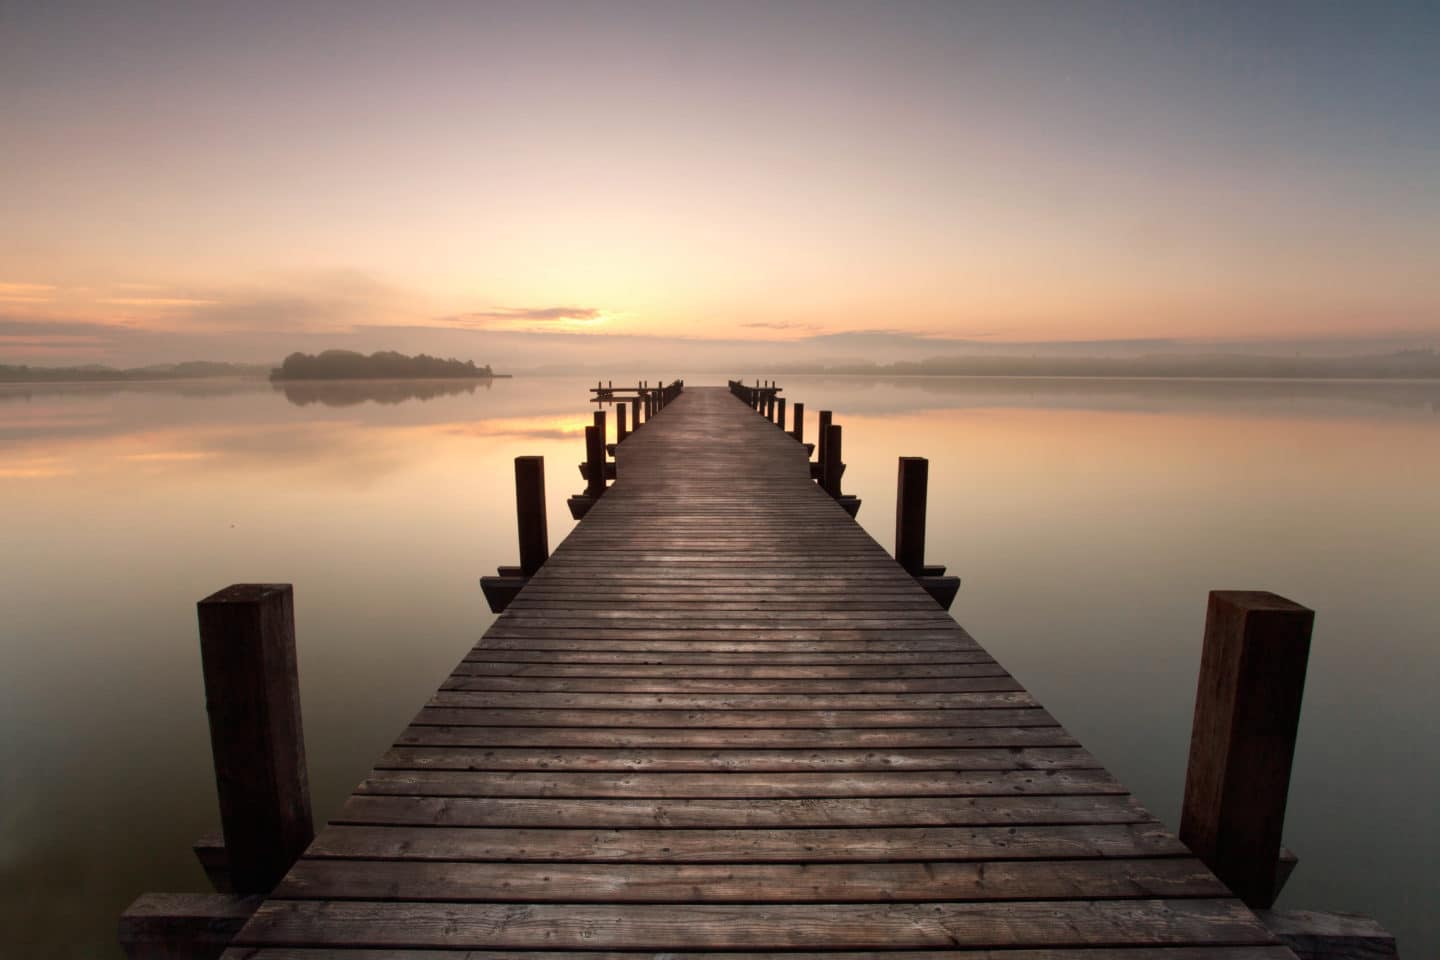 a long pier leading out onto the lake